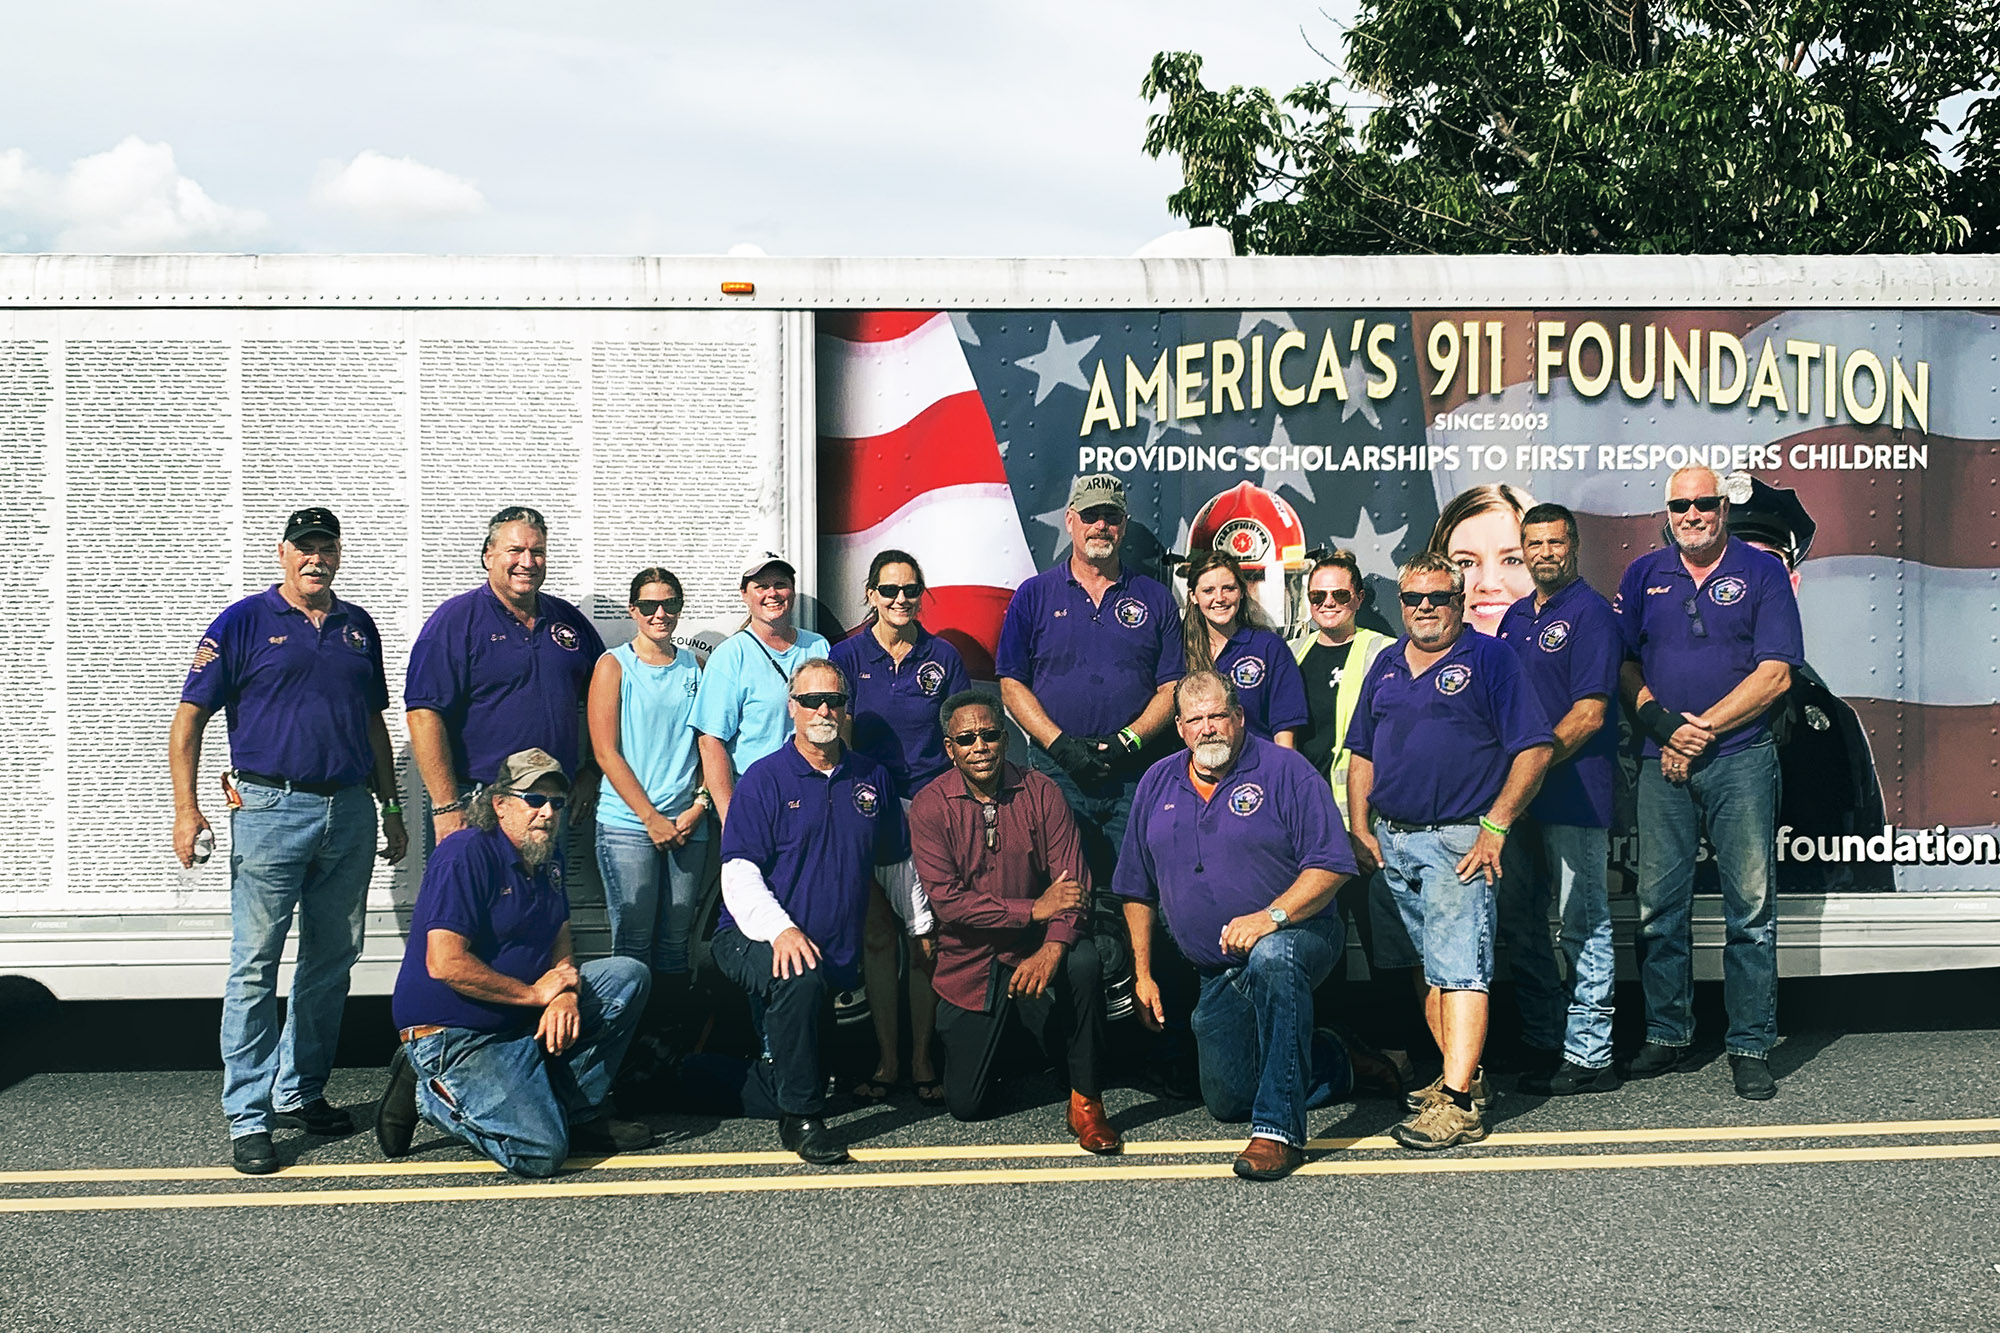 Group photo of people who volunteer for America's 911 Foundation in front of the organizations trailer